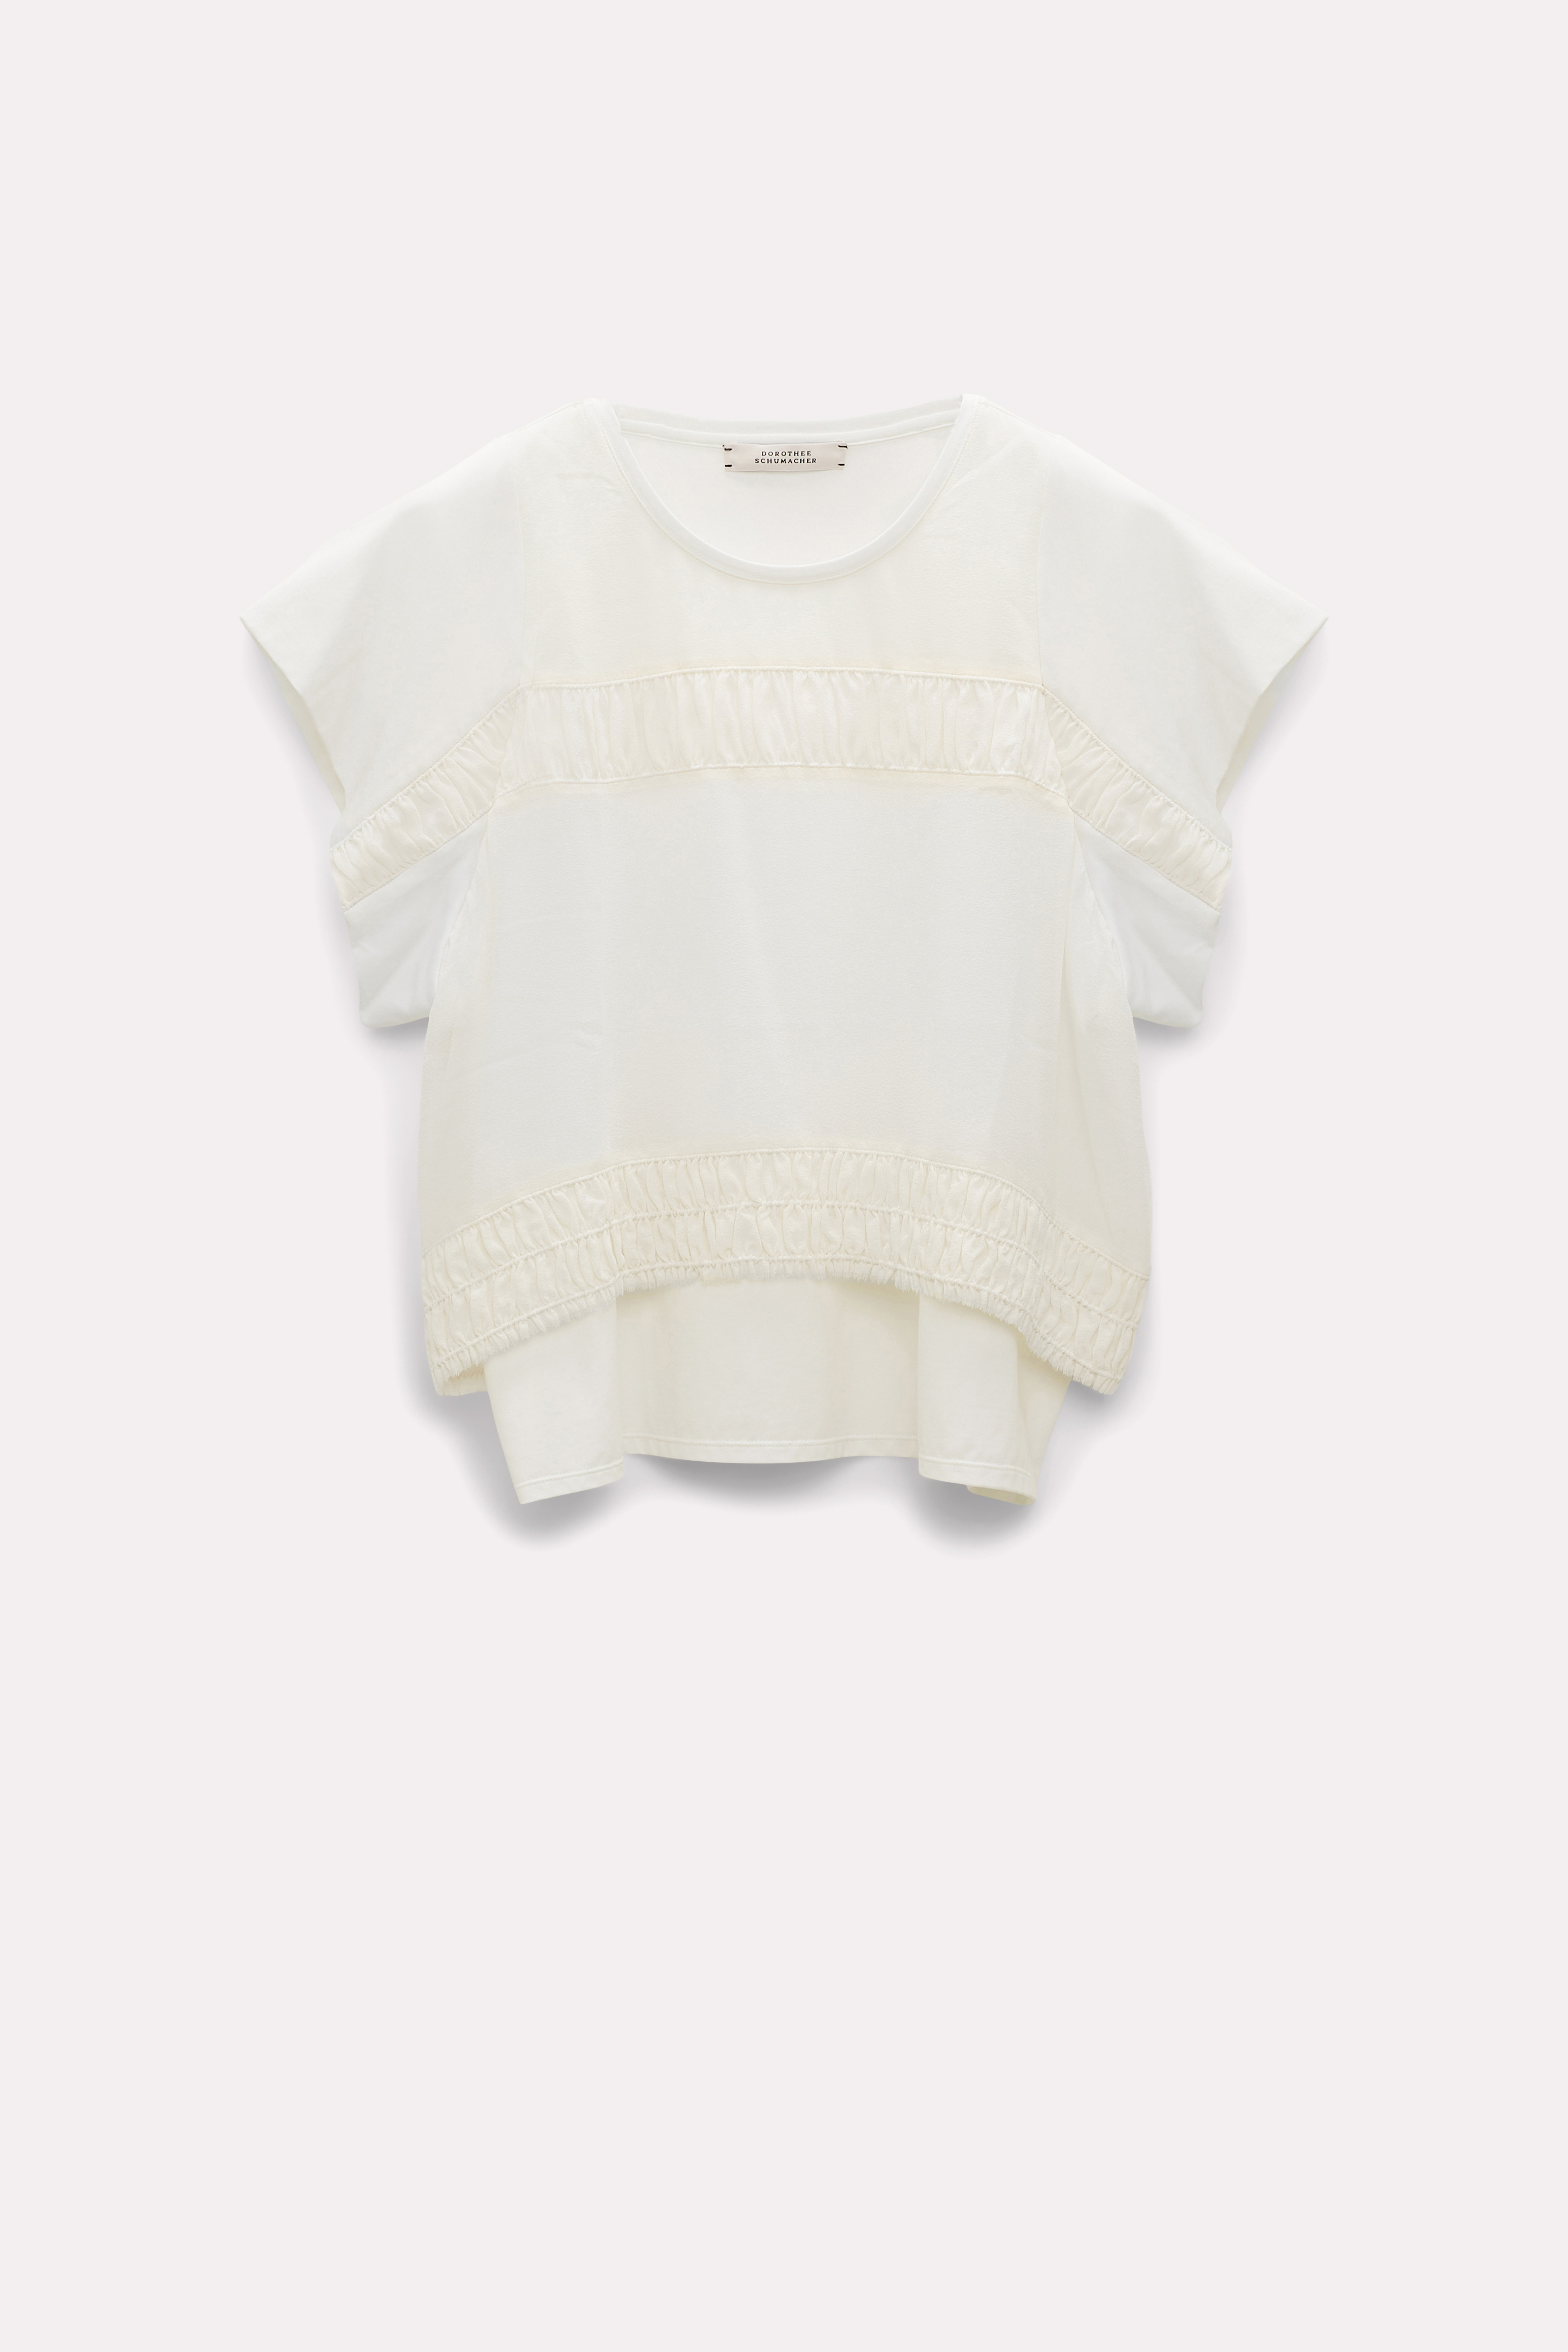 Dorothee Schumacher Top With Smocked Trim In White